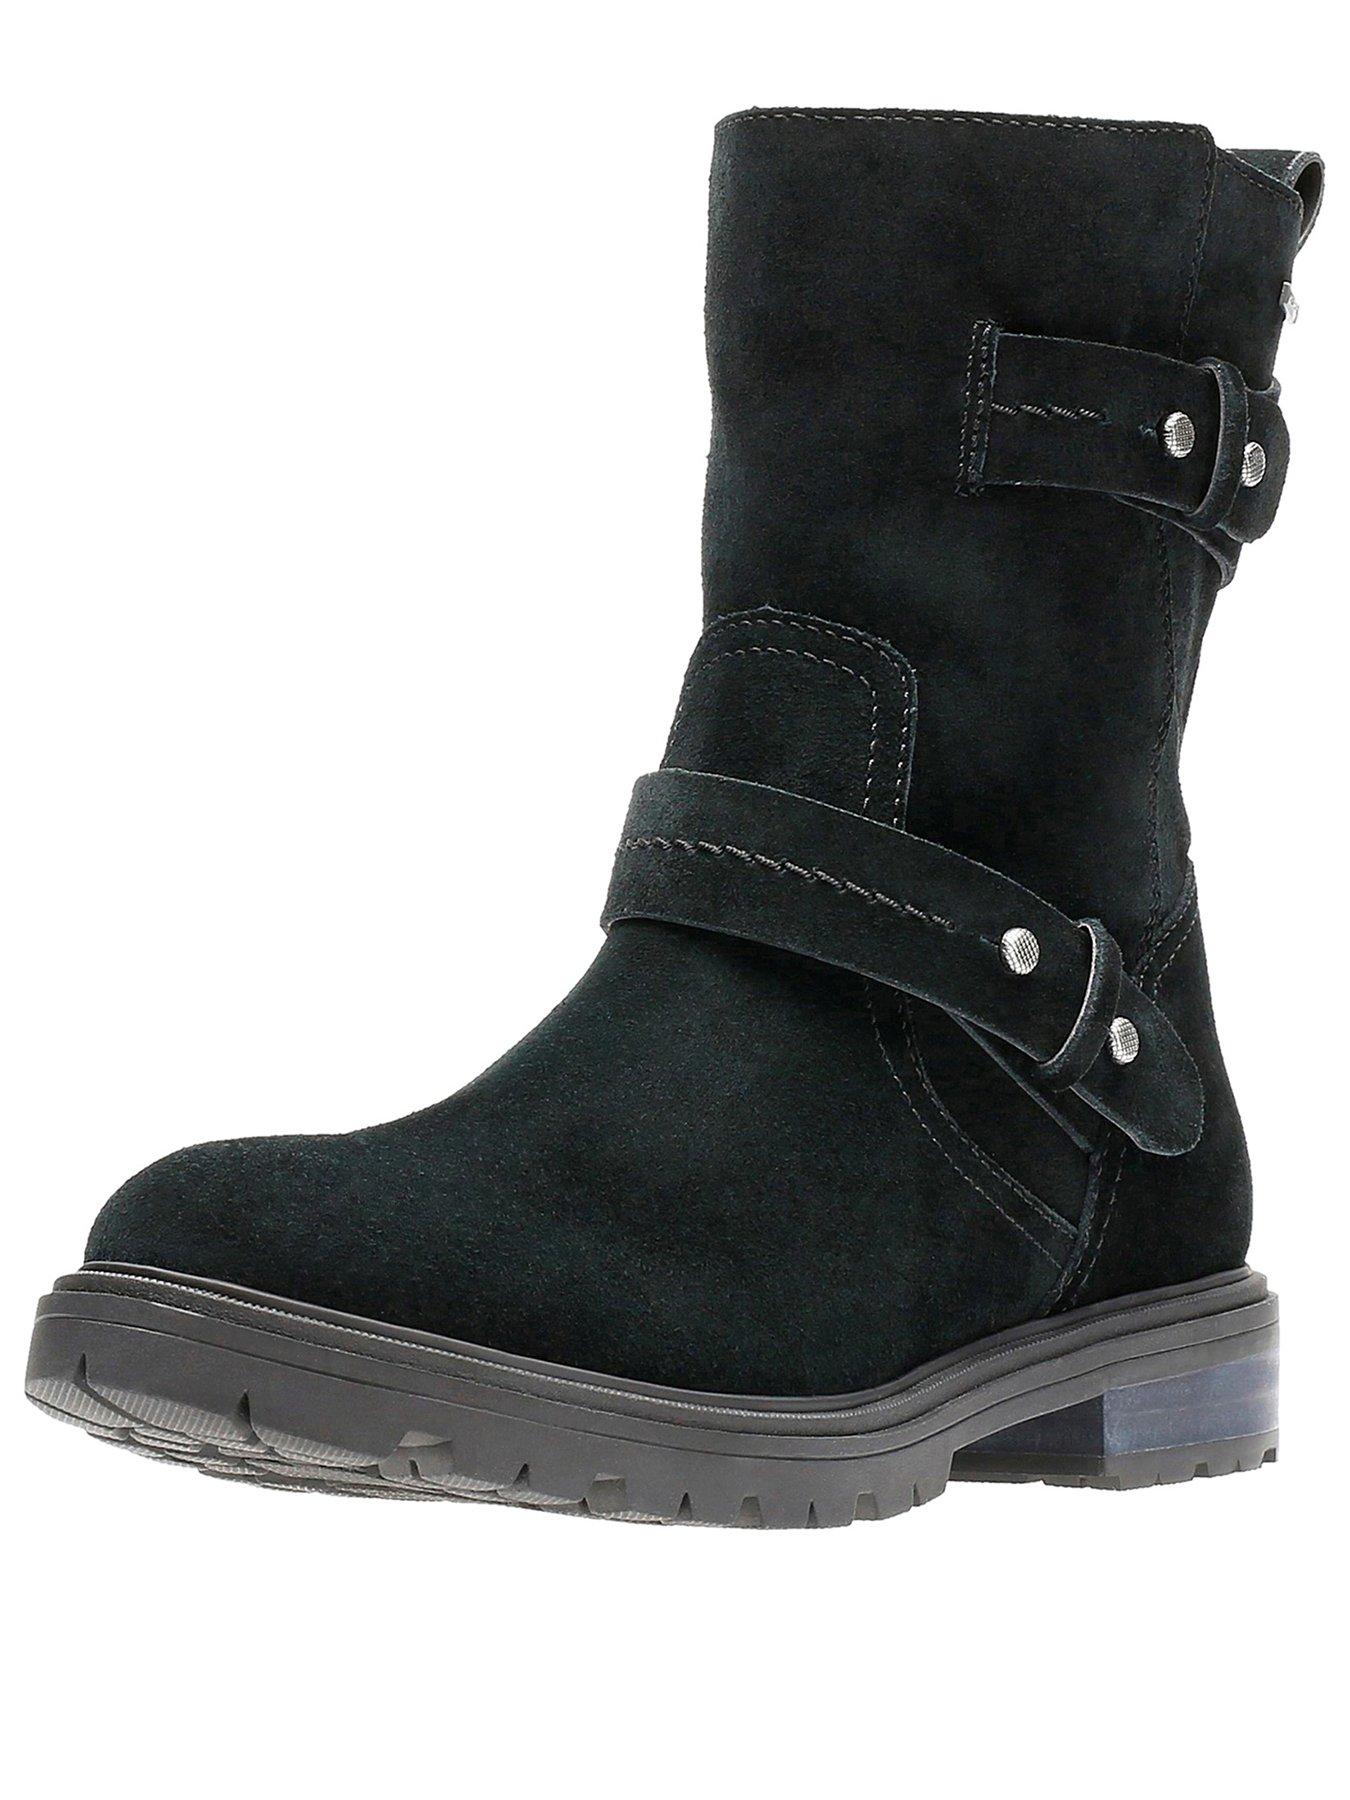 Buy clarks kids winter boots cheap,up 